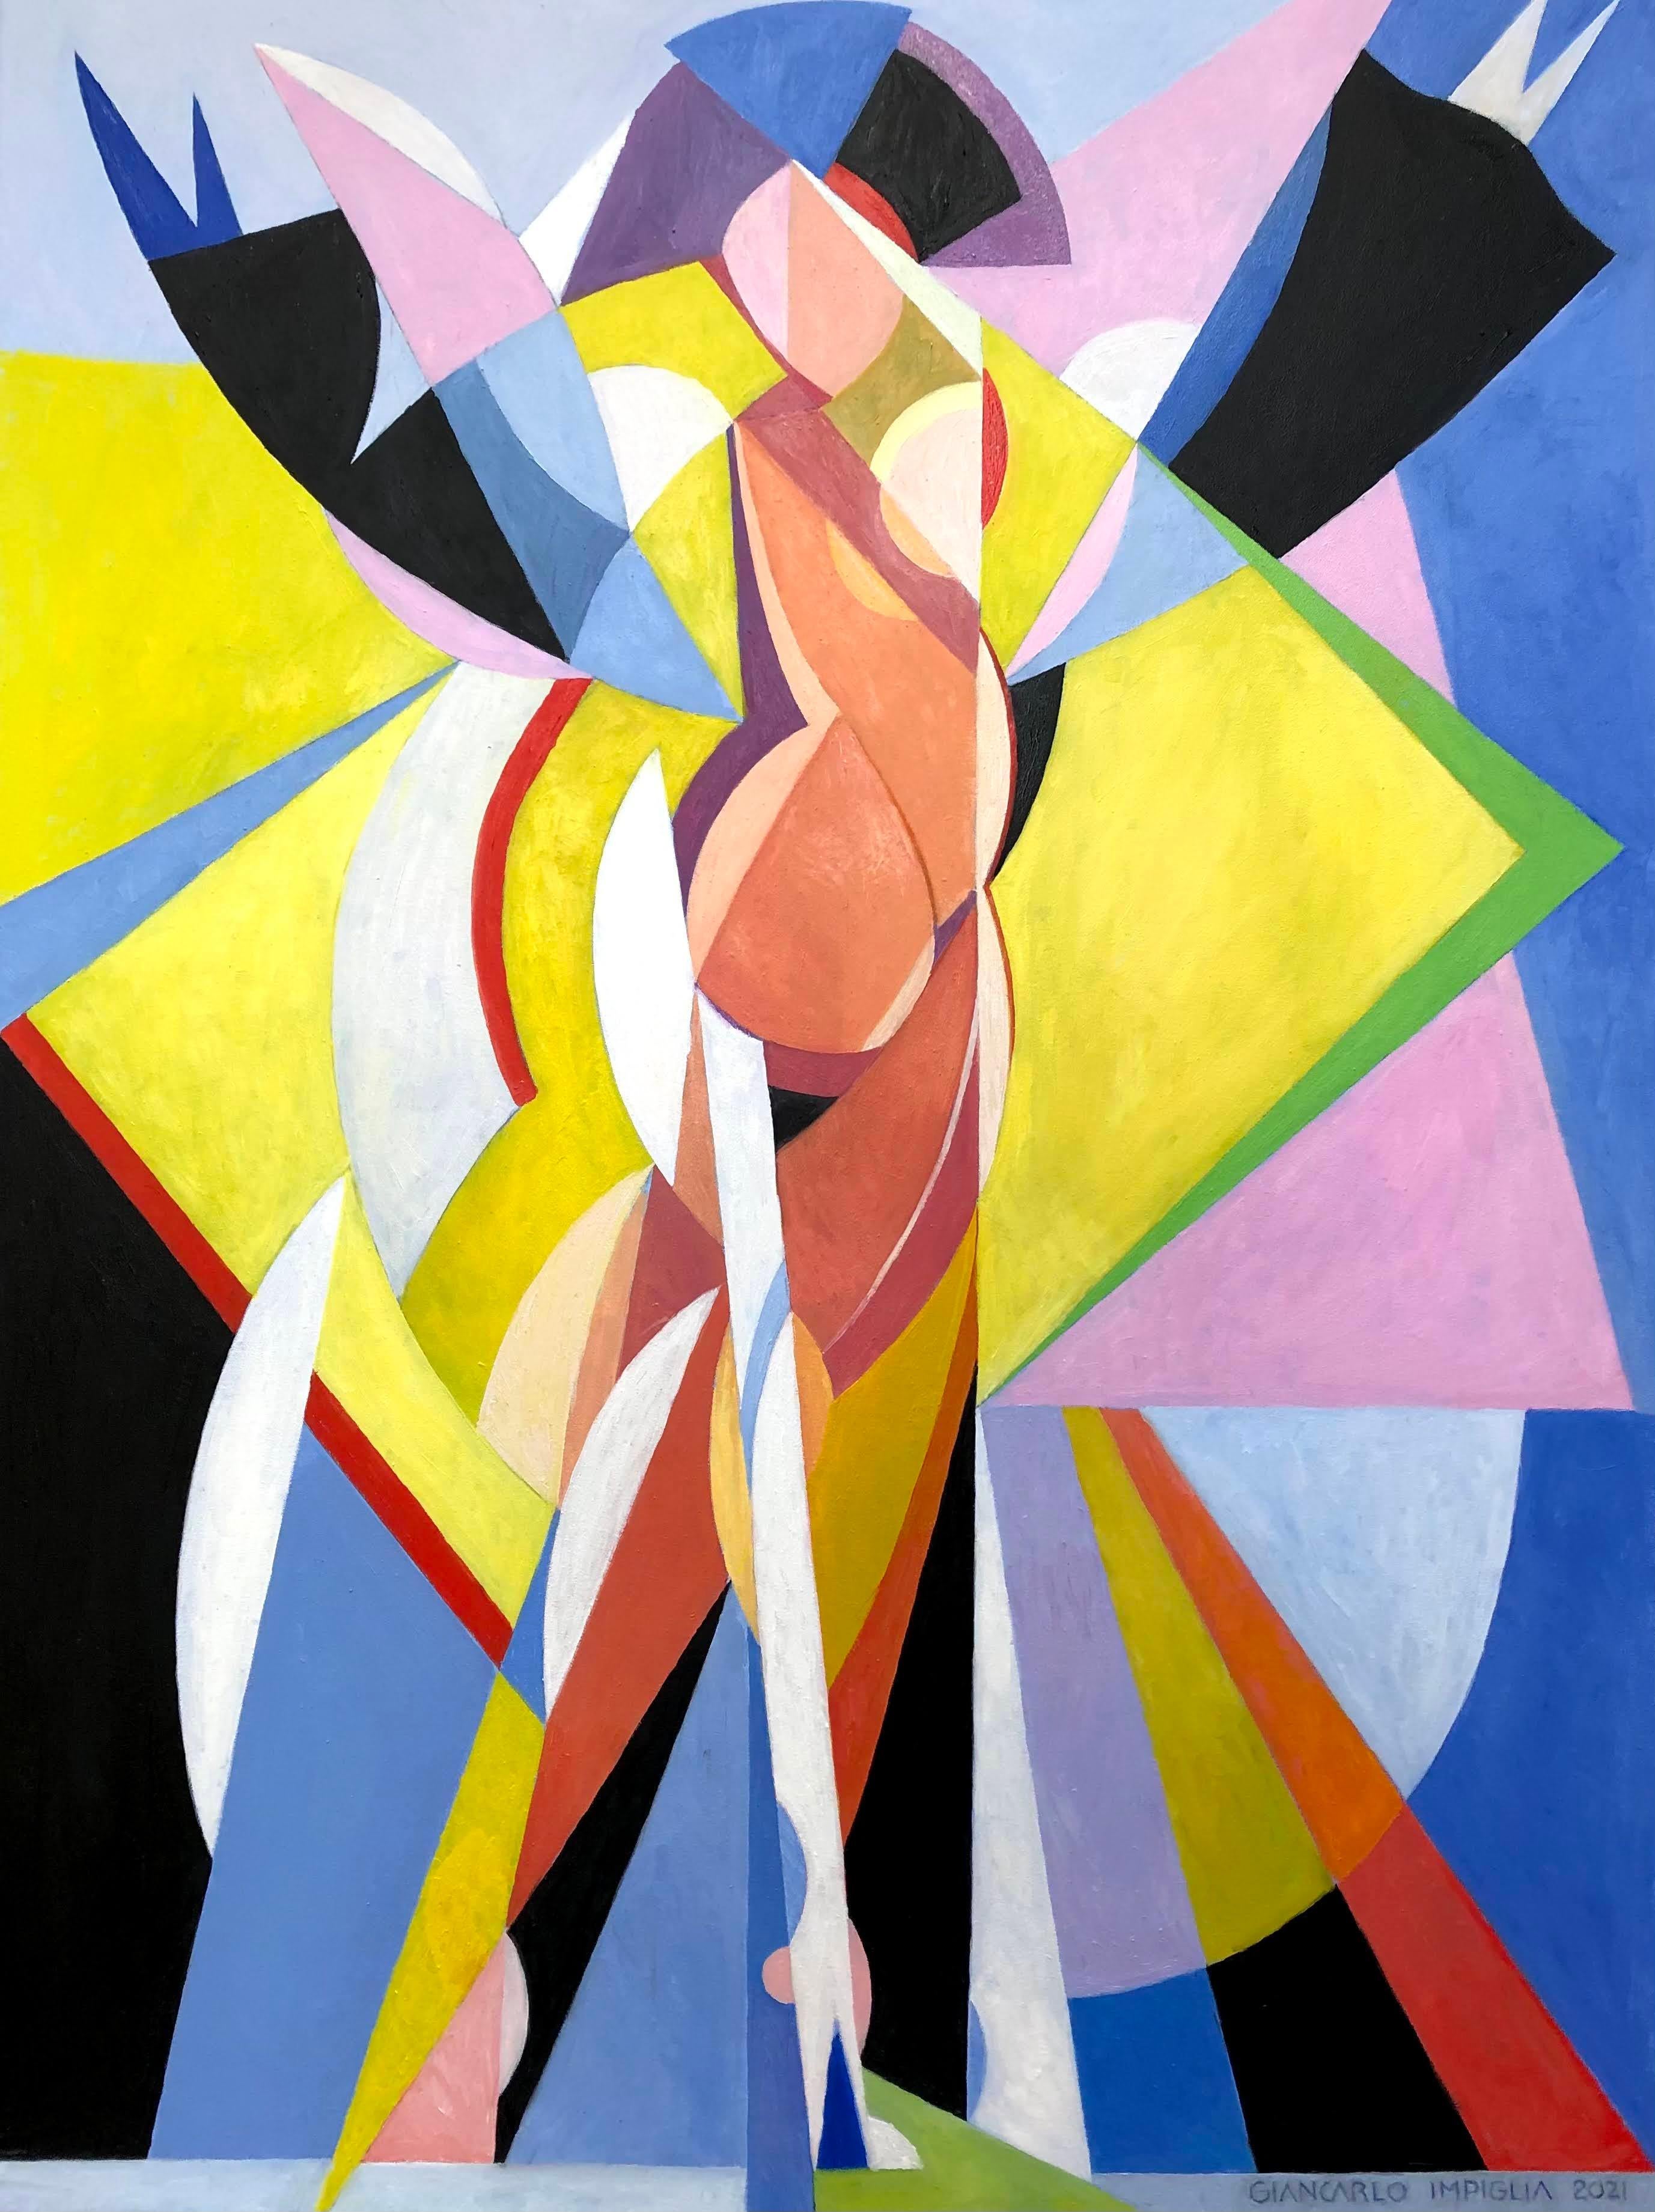 Giancarlo Impiglia Figurative Painting - Figurative, cubist oil painting, Broadway, "Theatrical"